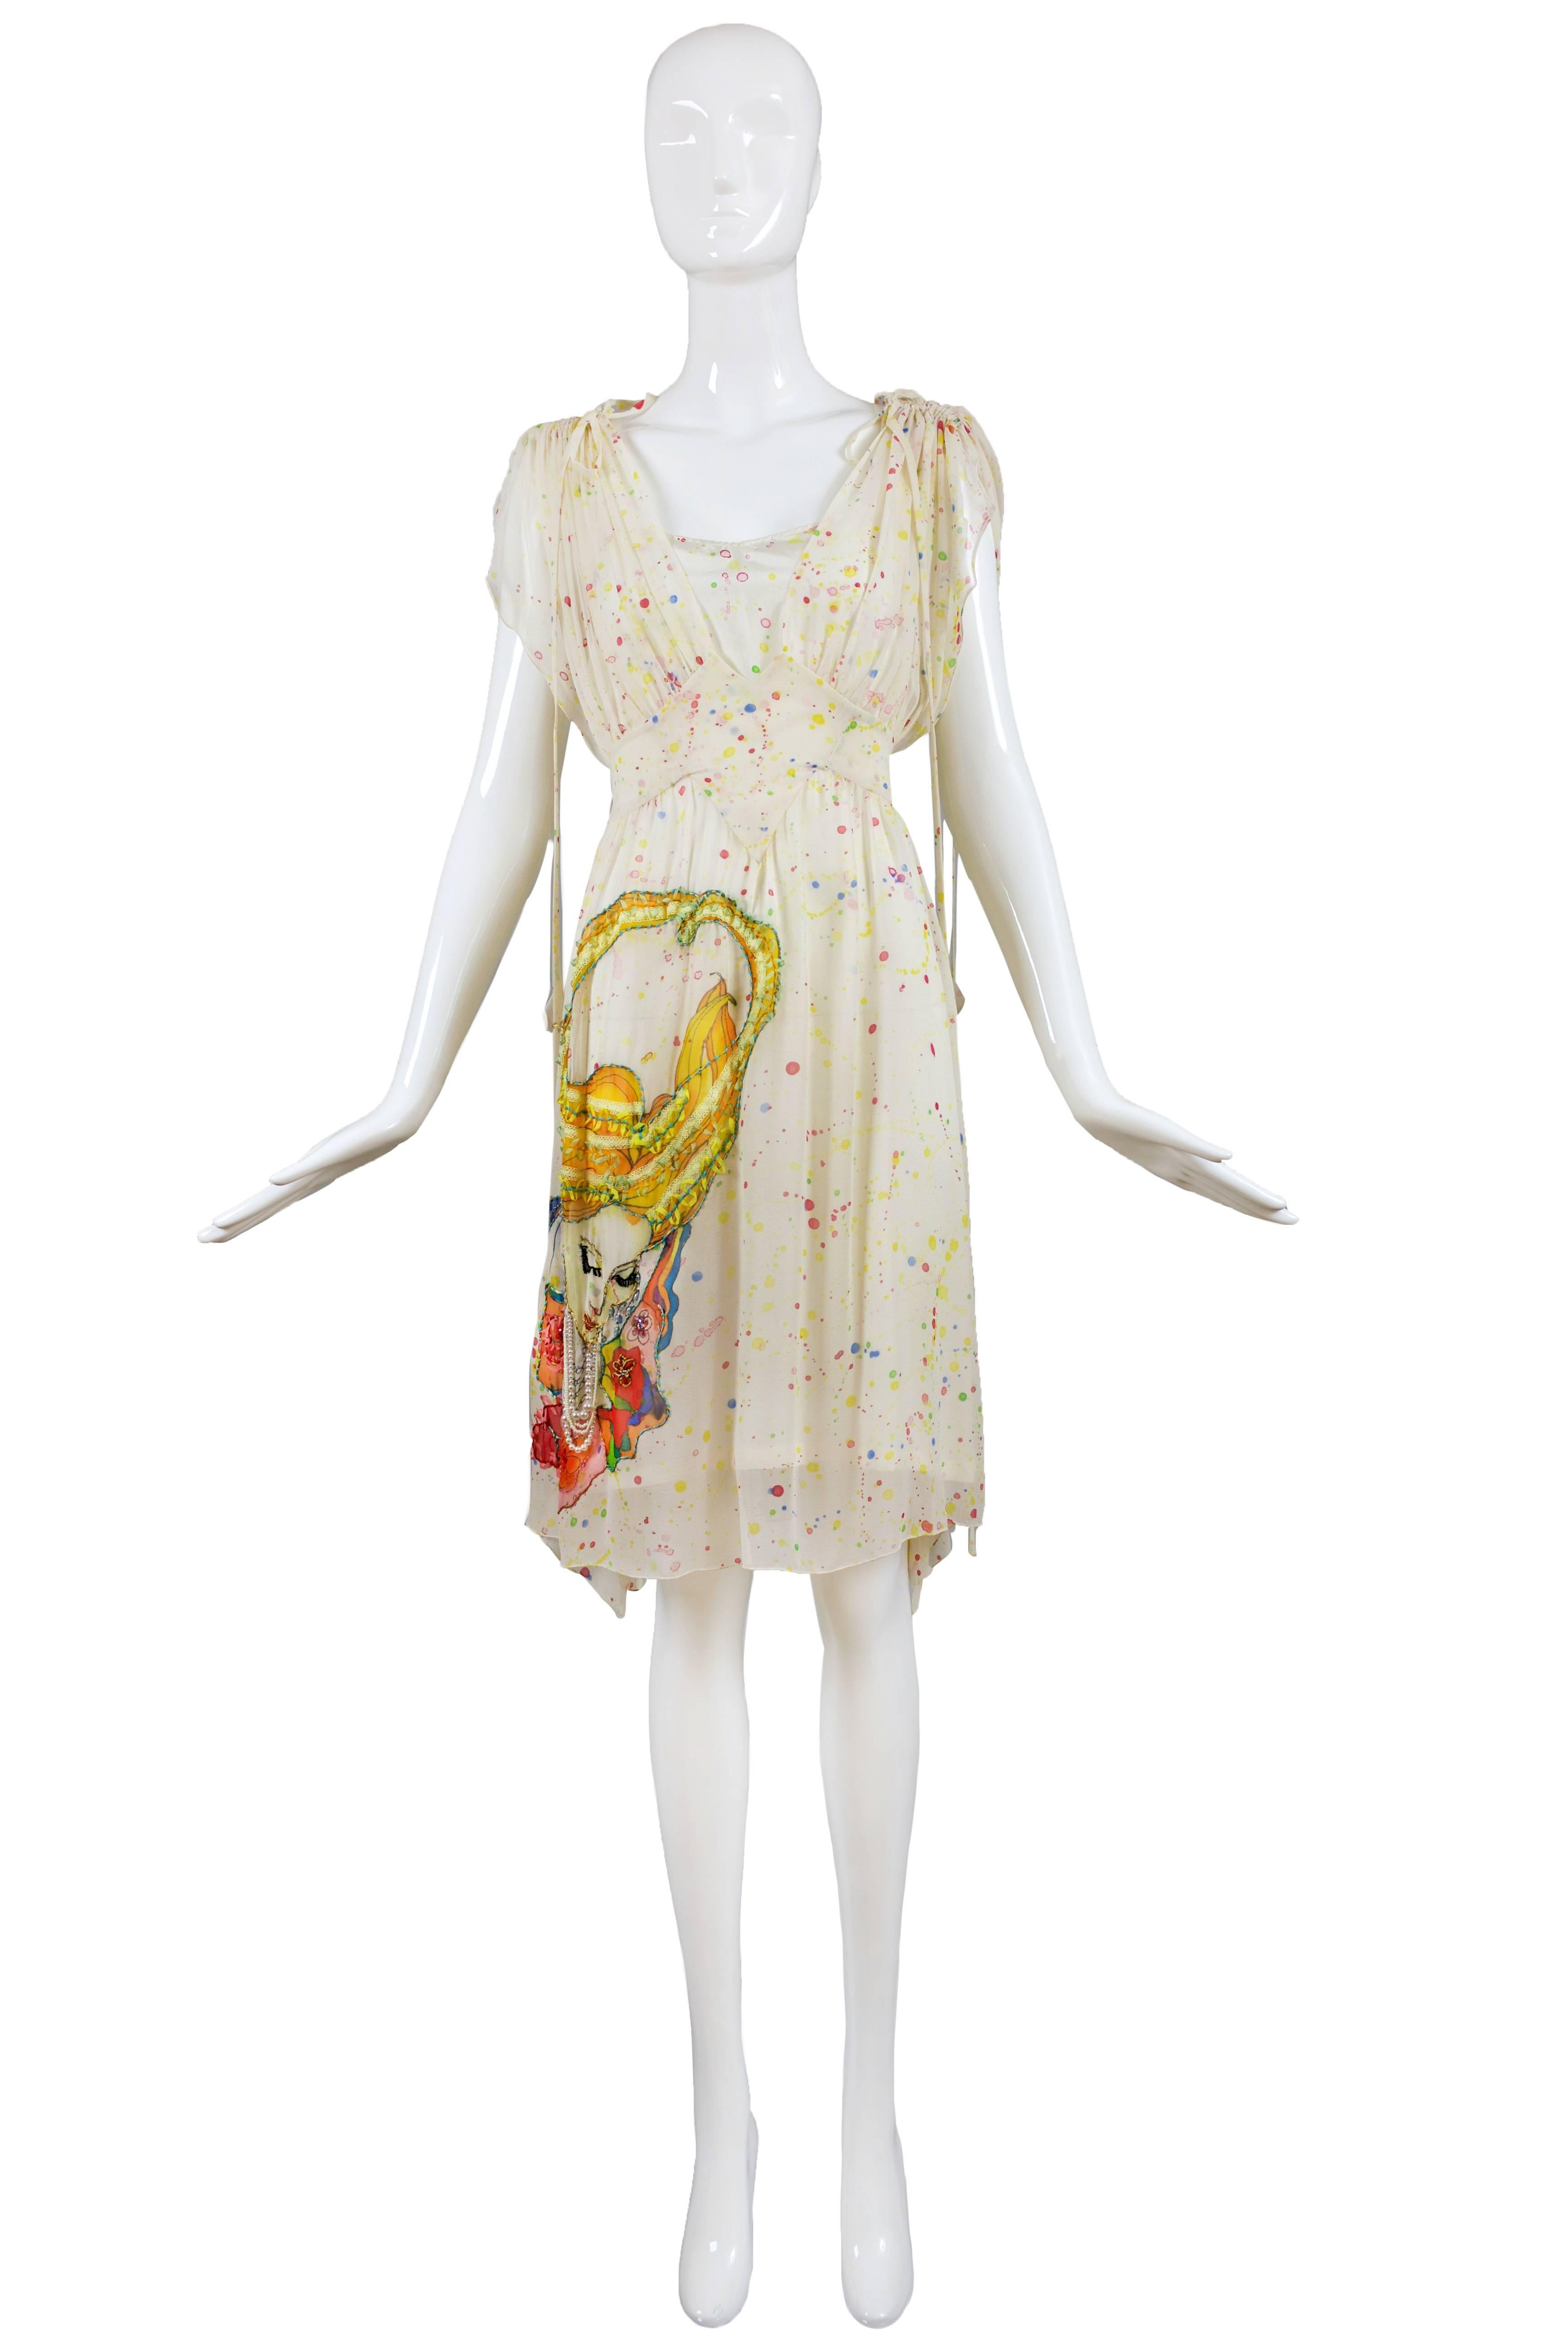 From Japanese design talent Tsumori Chisato, this limited edition, romantic 100% silk creme chiffon multi-colored polka dot print knee-length day dress with gathered shoulders and ties, deep v-neckline, inset waist yoke and matching slip. At the